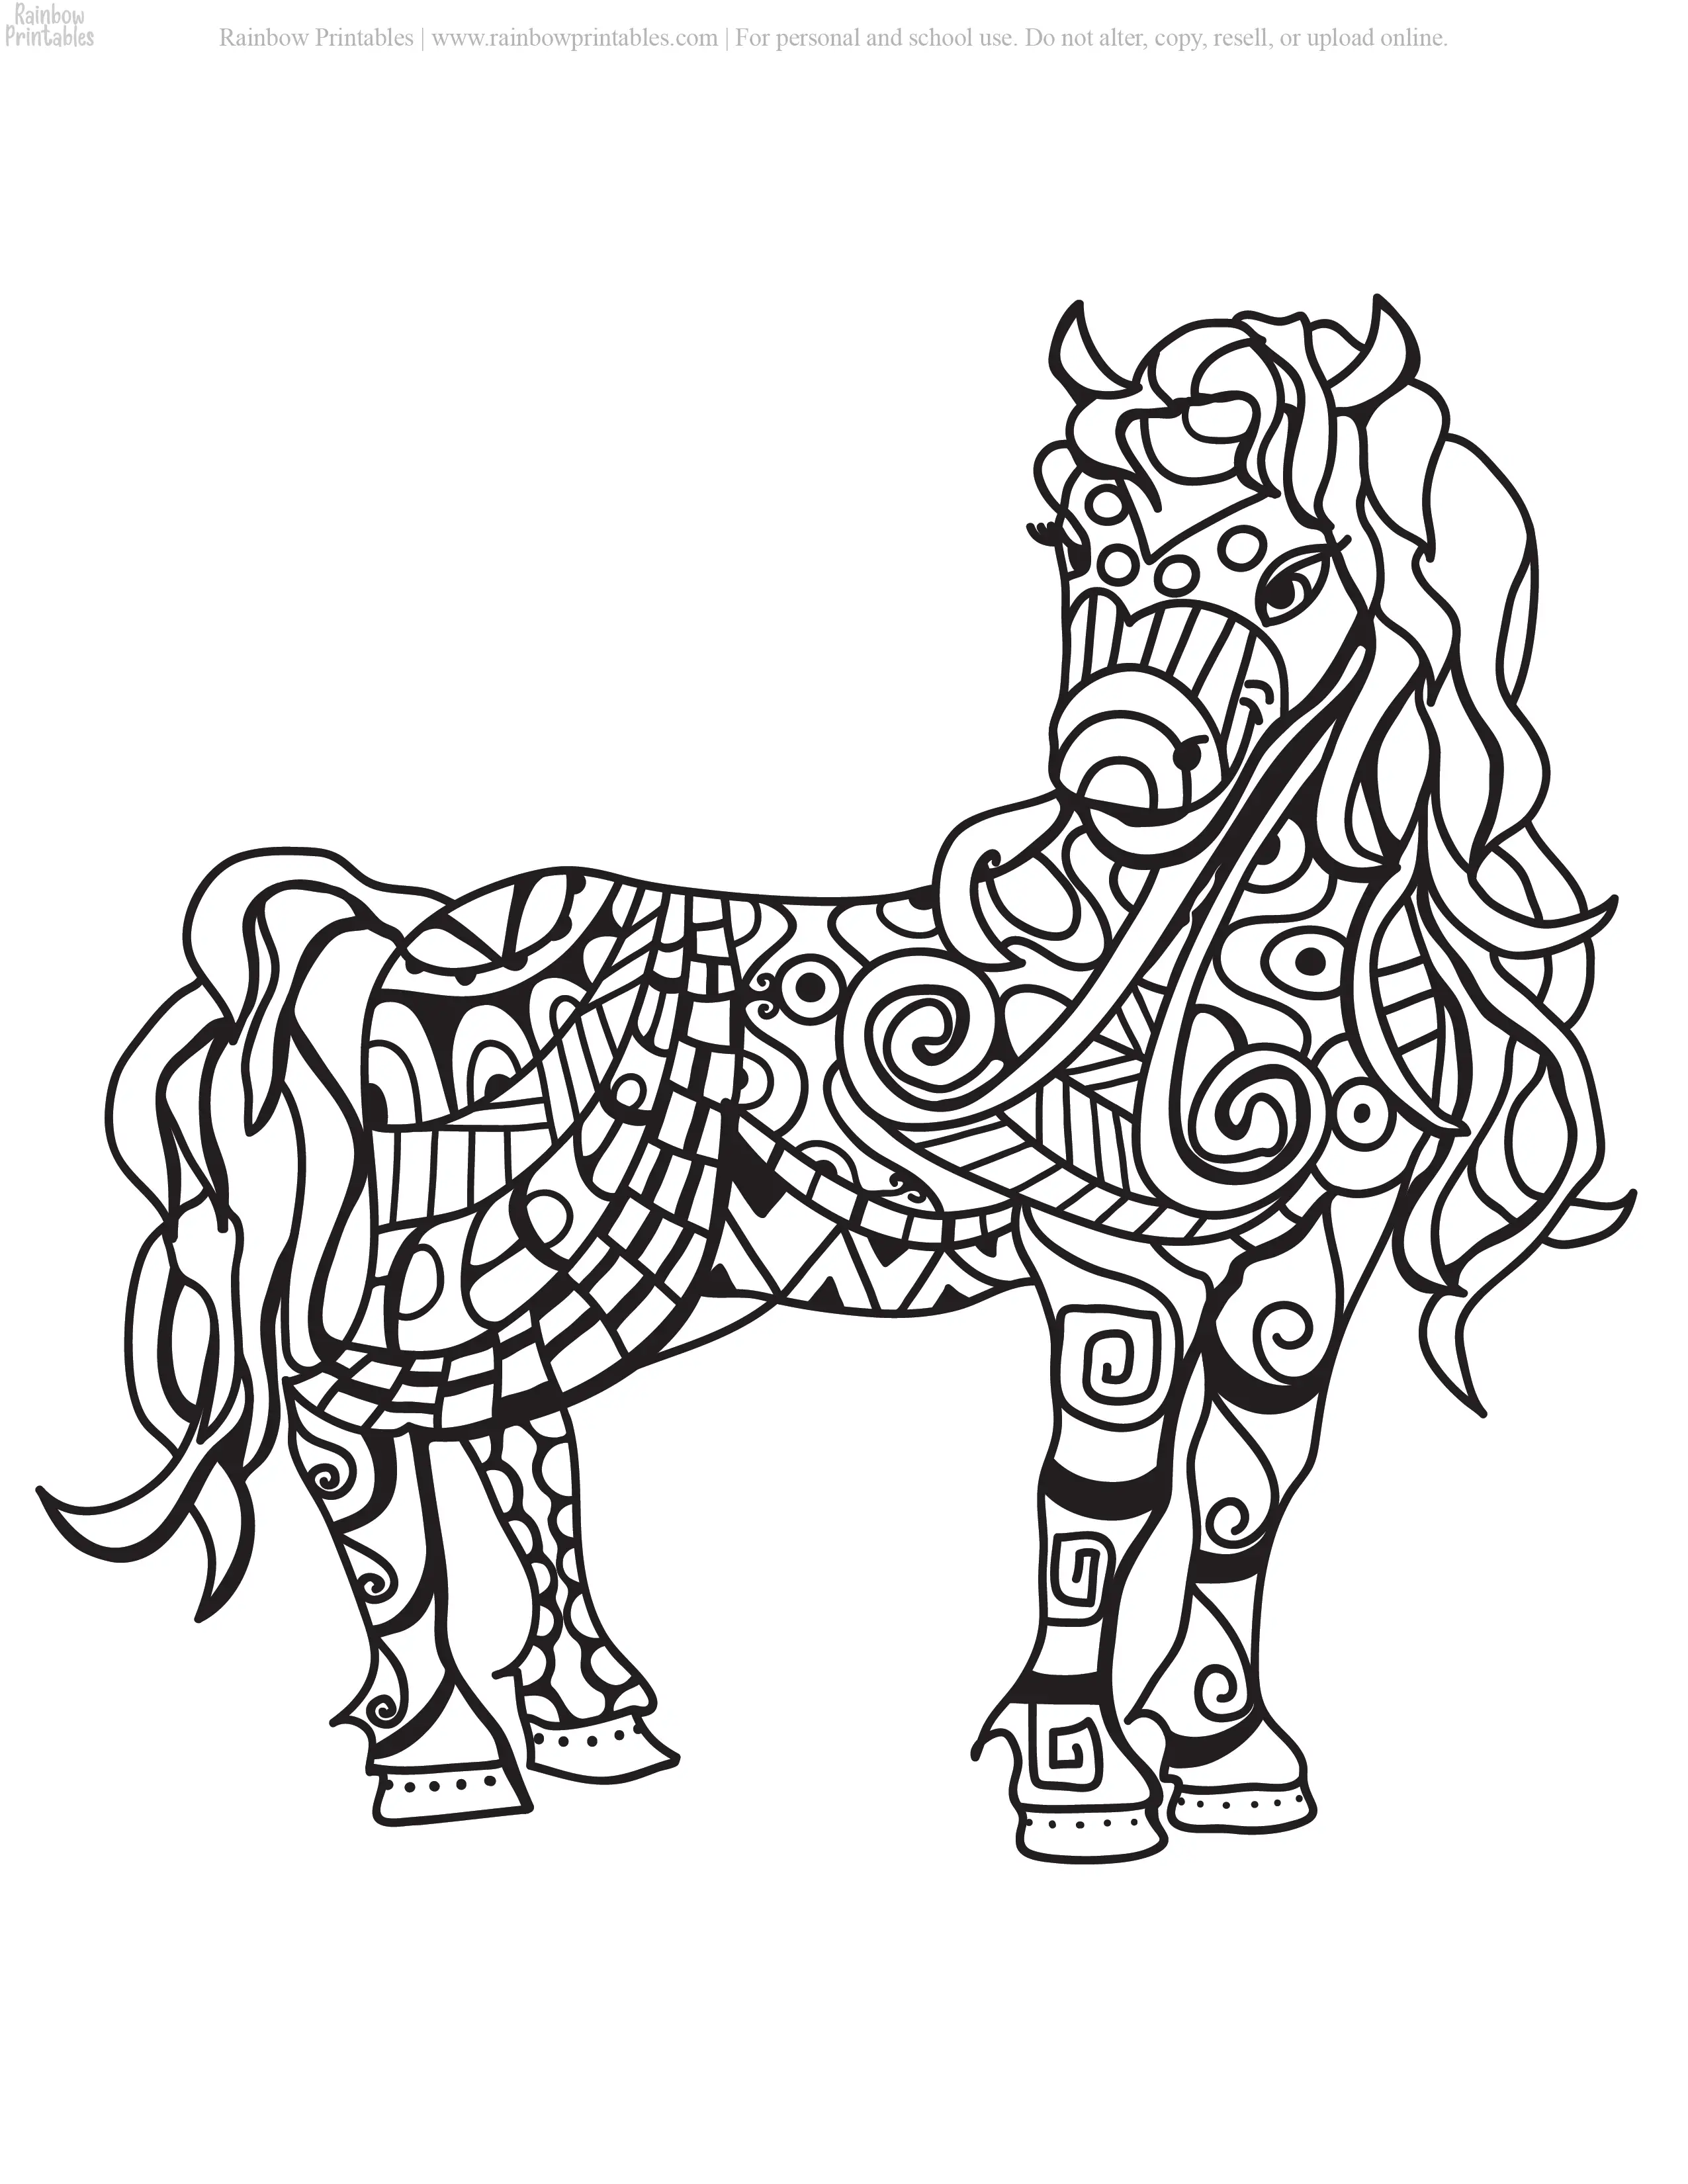 Free Pony Mosaic Coloring Pages   Rainbow Printables